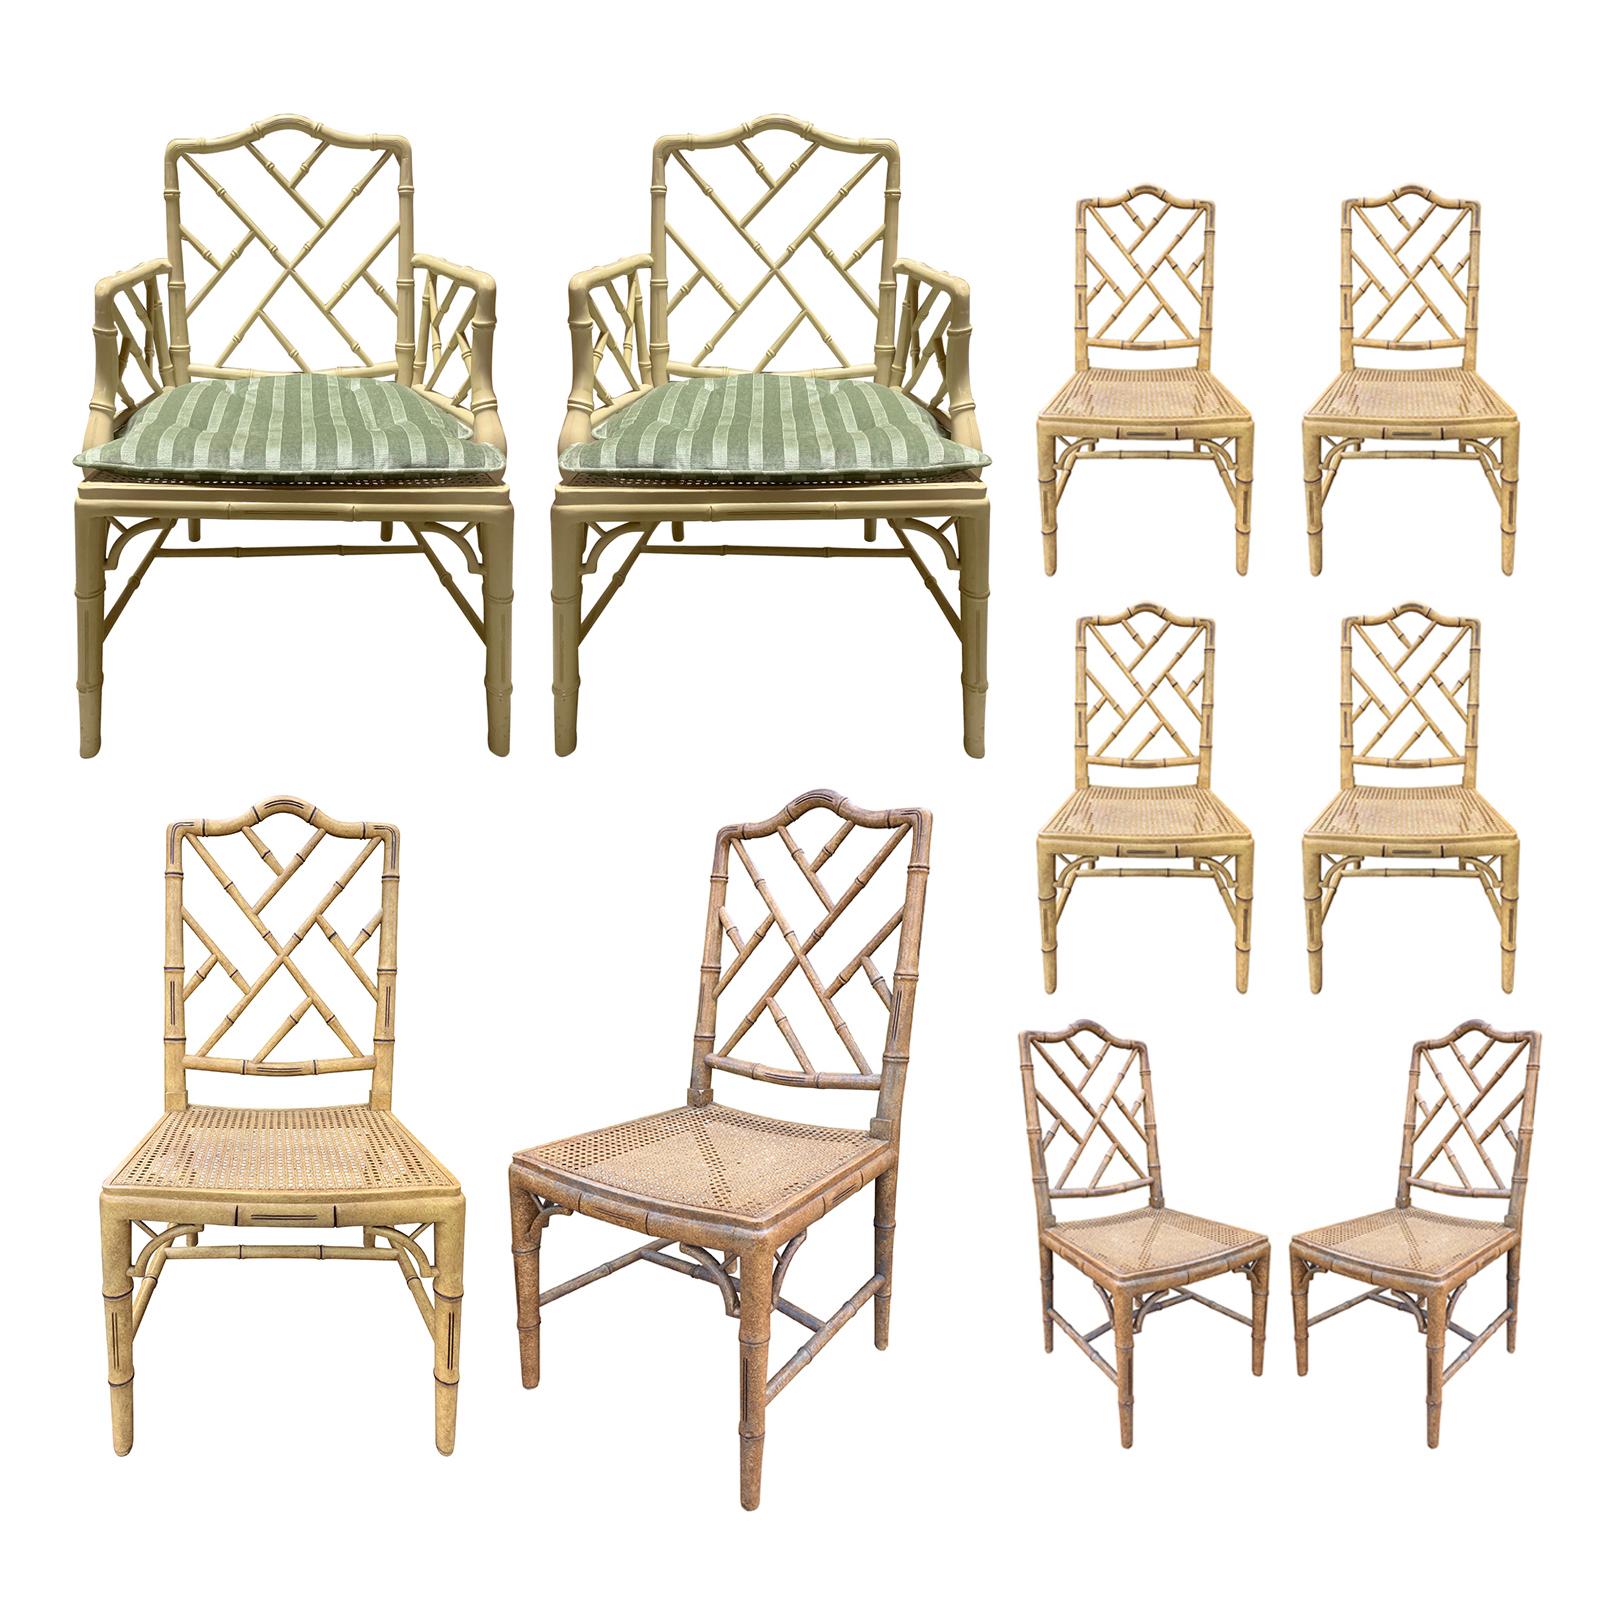 Set of 10 Mid-20th Century Faux Bamboo Dining Chairs with Cane Seats